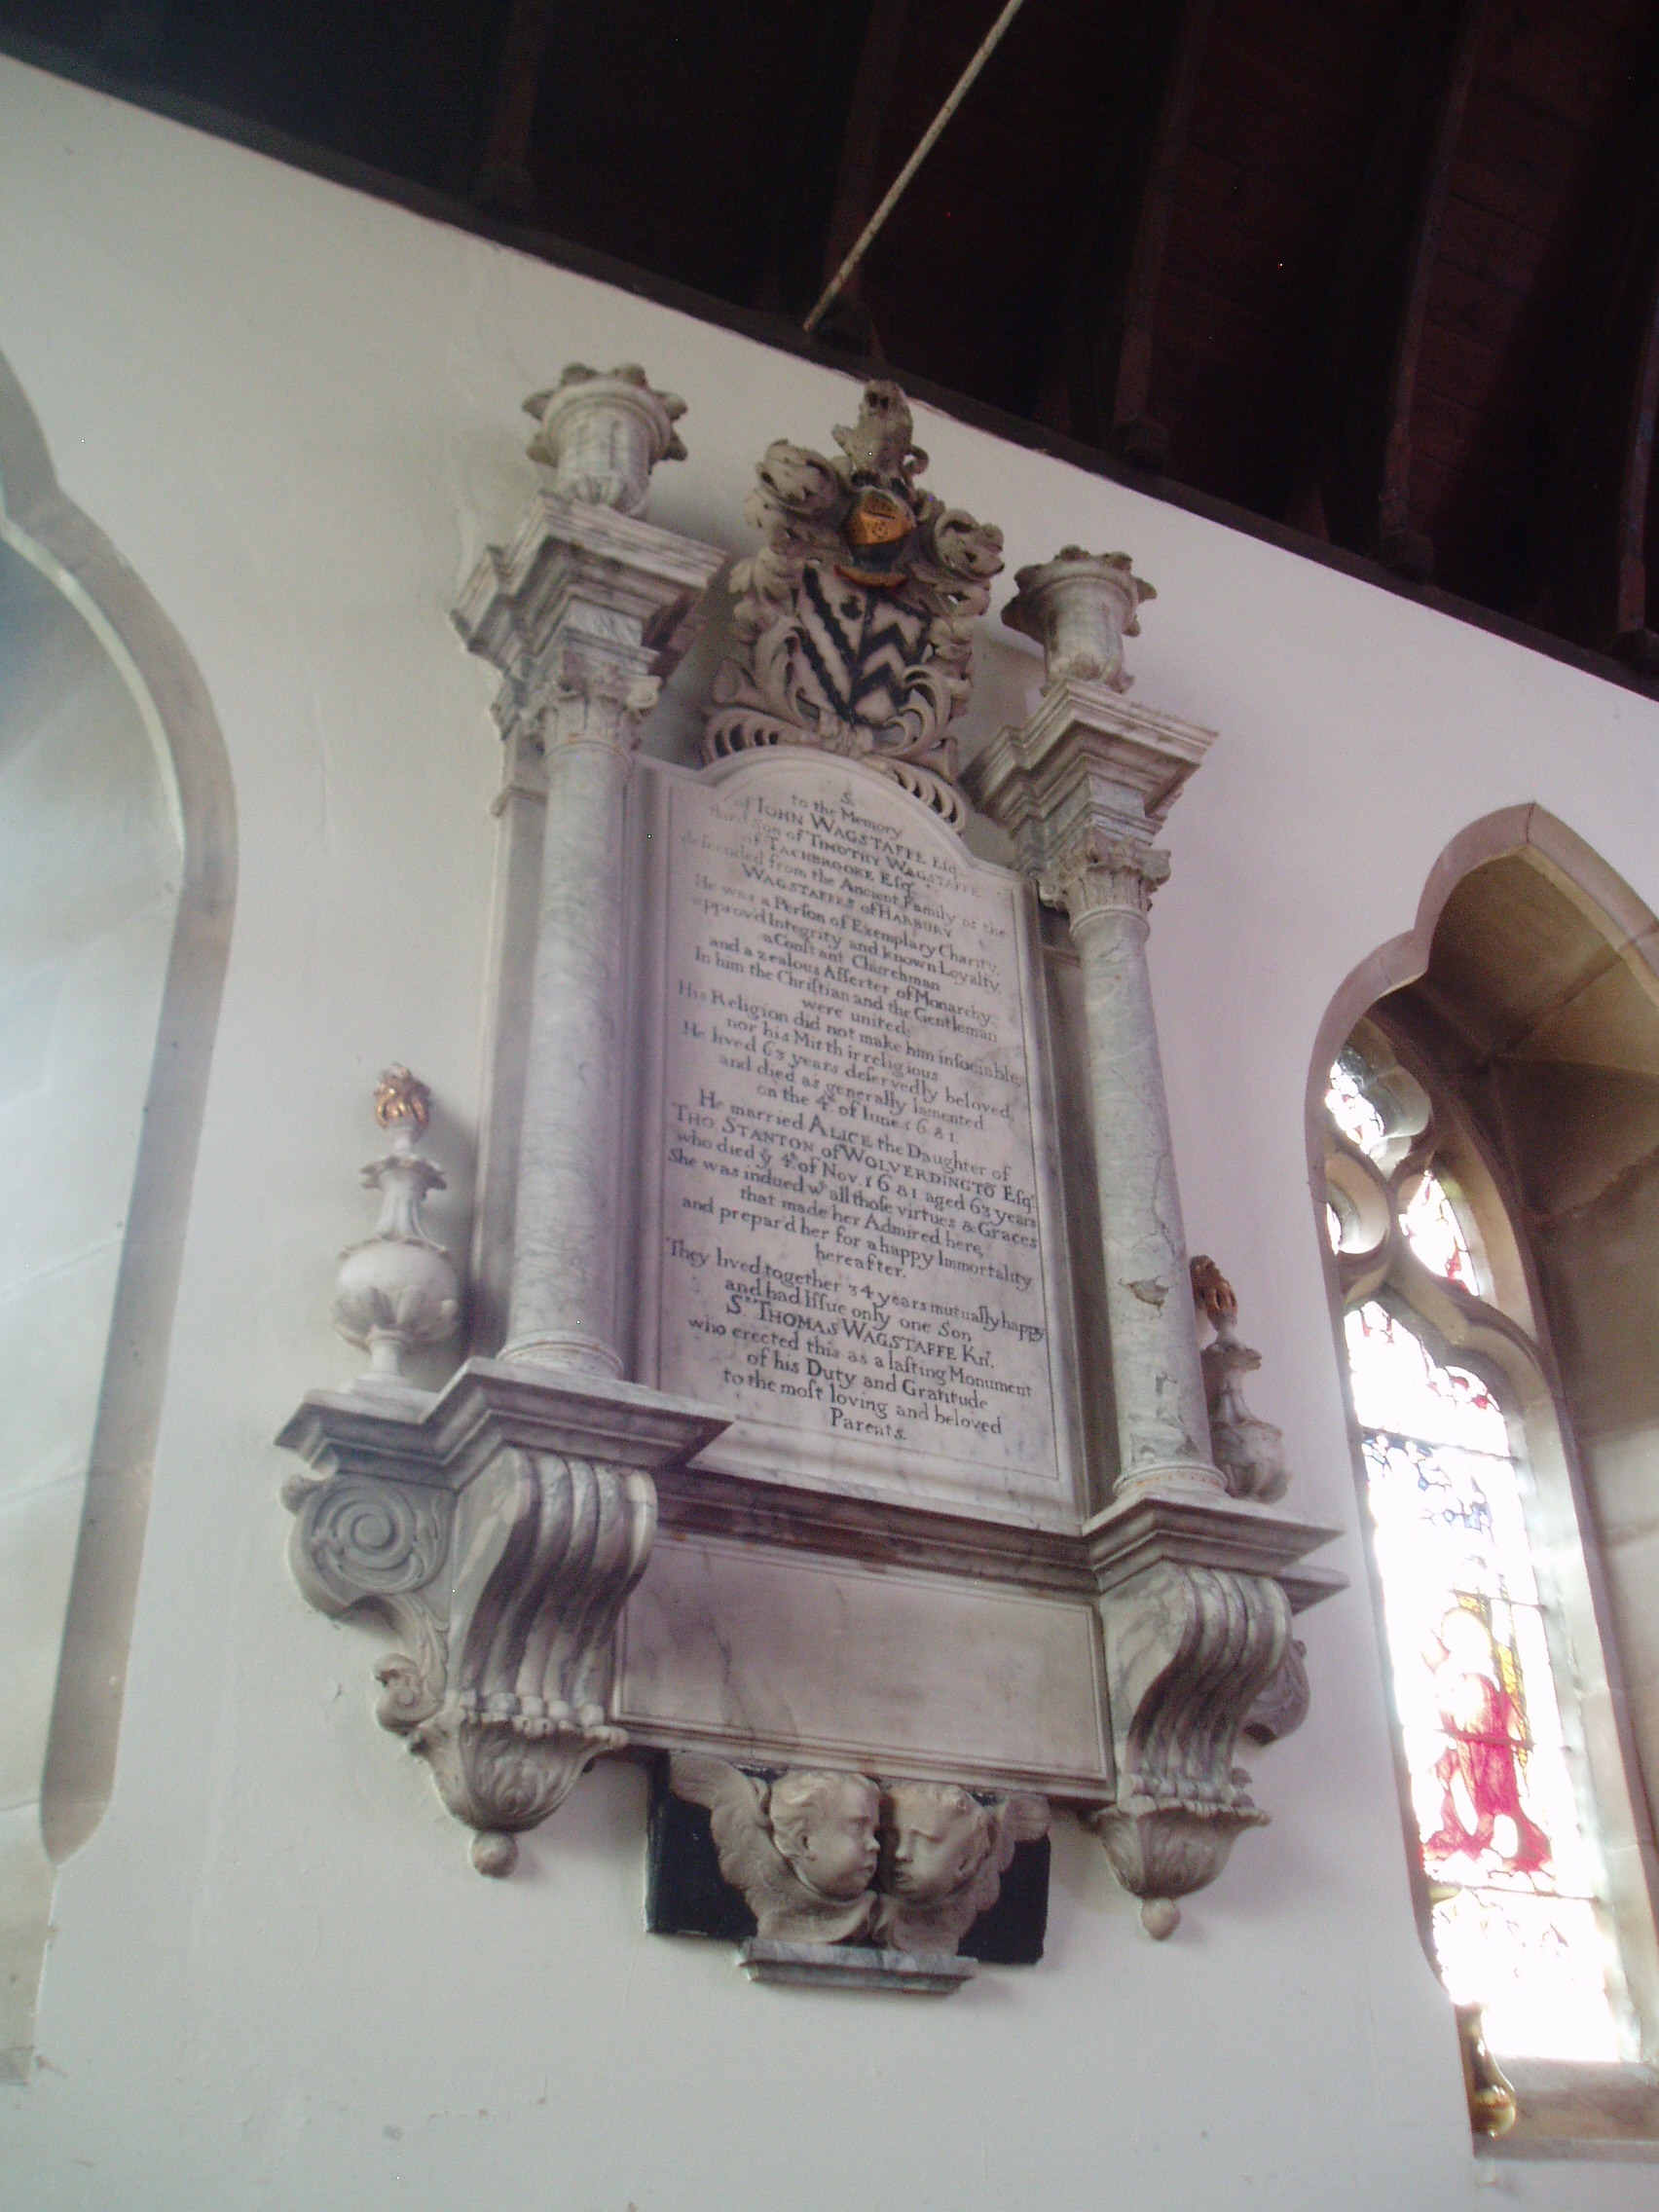 John Wagstaffe Memorial, Bishop's Tachbrook Monument on the south side of the sanctuary at Bishops Tachbrook commemorating John Wagstaffe (d.1681). St Chad's at Bishops Tachbrook dates largely from the Decorated and early Perpendicular periods, but is far older in origin with some traces of Norman work. It was restored in 1855 when the chancel was rebuilt. Inside the church has a fine set of Victorian windows by several different makers, including an early piece by Morris & Co and a fine east window by Heaton, Butler & Bayne commemorating Sir Charles Kingsley (author of 'The Water Babies') whose wife lived and died locally. There are also several wall monuments from the Baroque period, the most notable being that adorned with swags and putti commemorating Sir Thomas Wagstaffe. This fine church is normally kept locked outside of services.